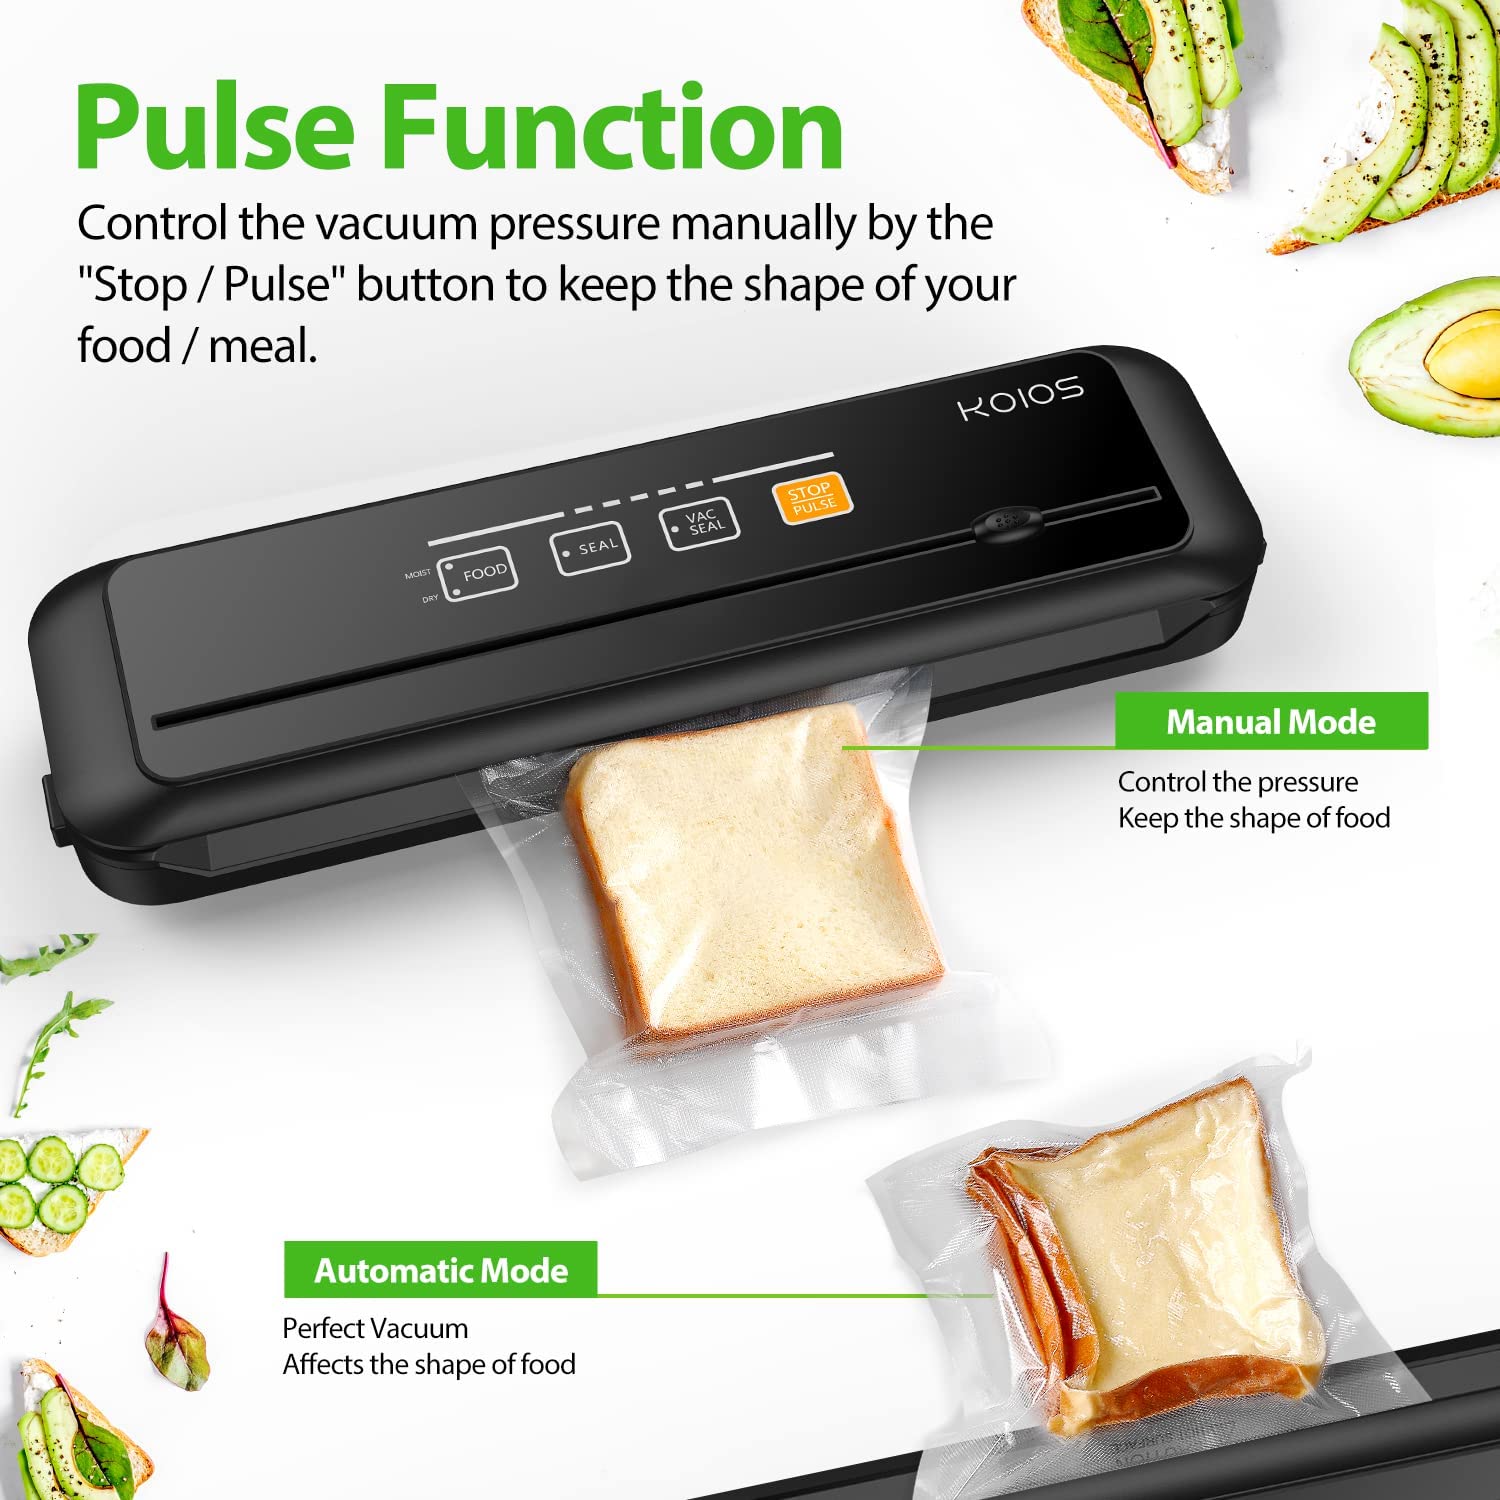 Pulse Function Control the vacuum pressure manually by the "Stop/Pulse"button to keep the shape of your food /meal.